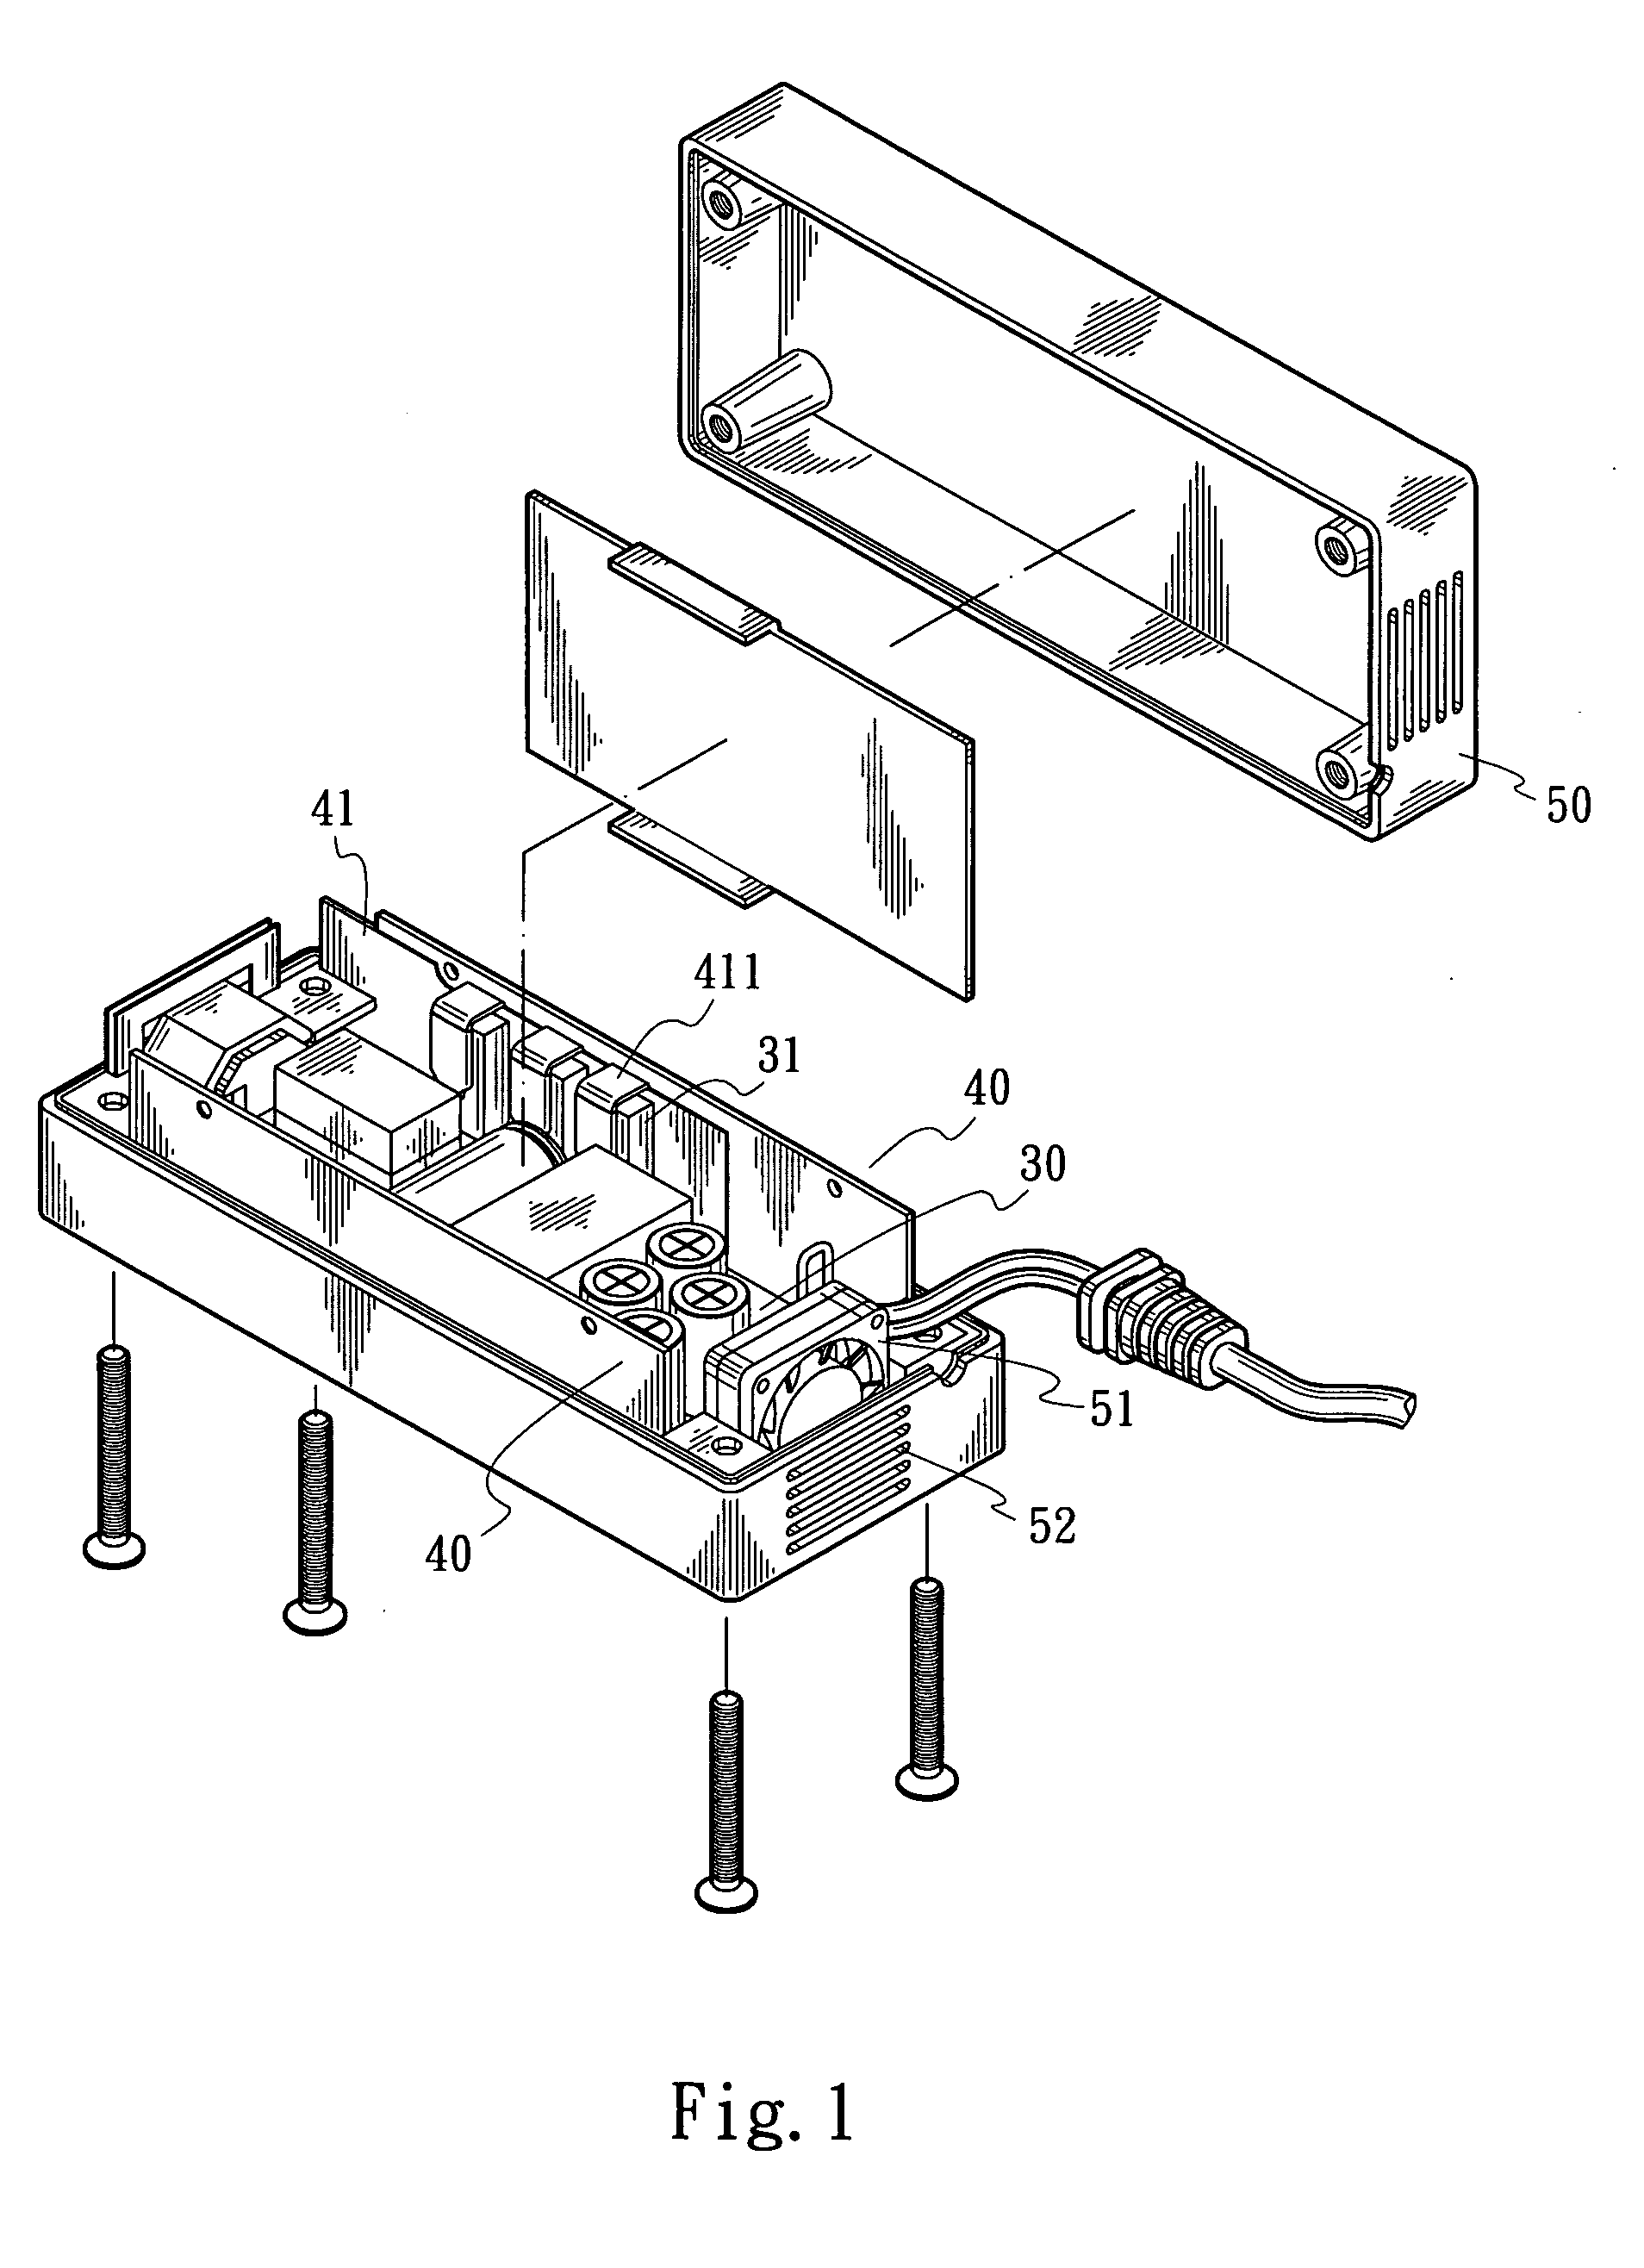 Heat sink structure for a power supply